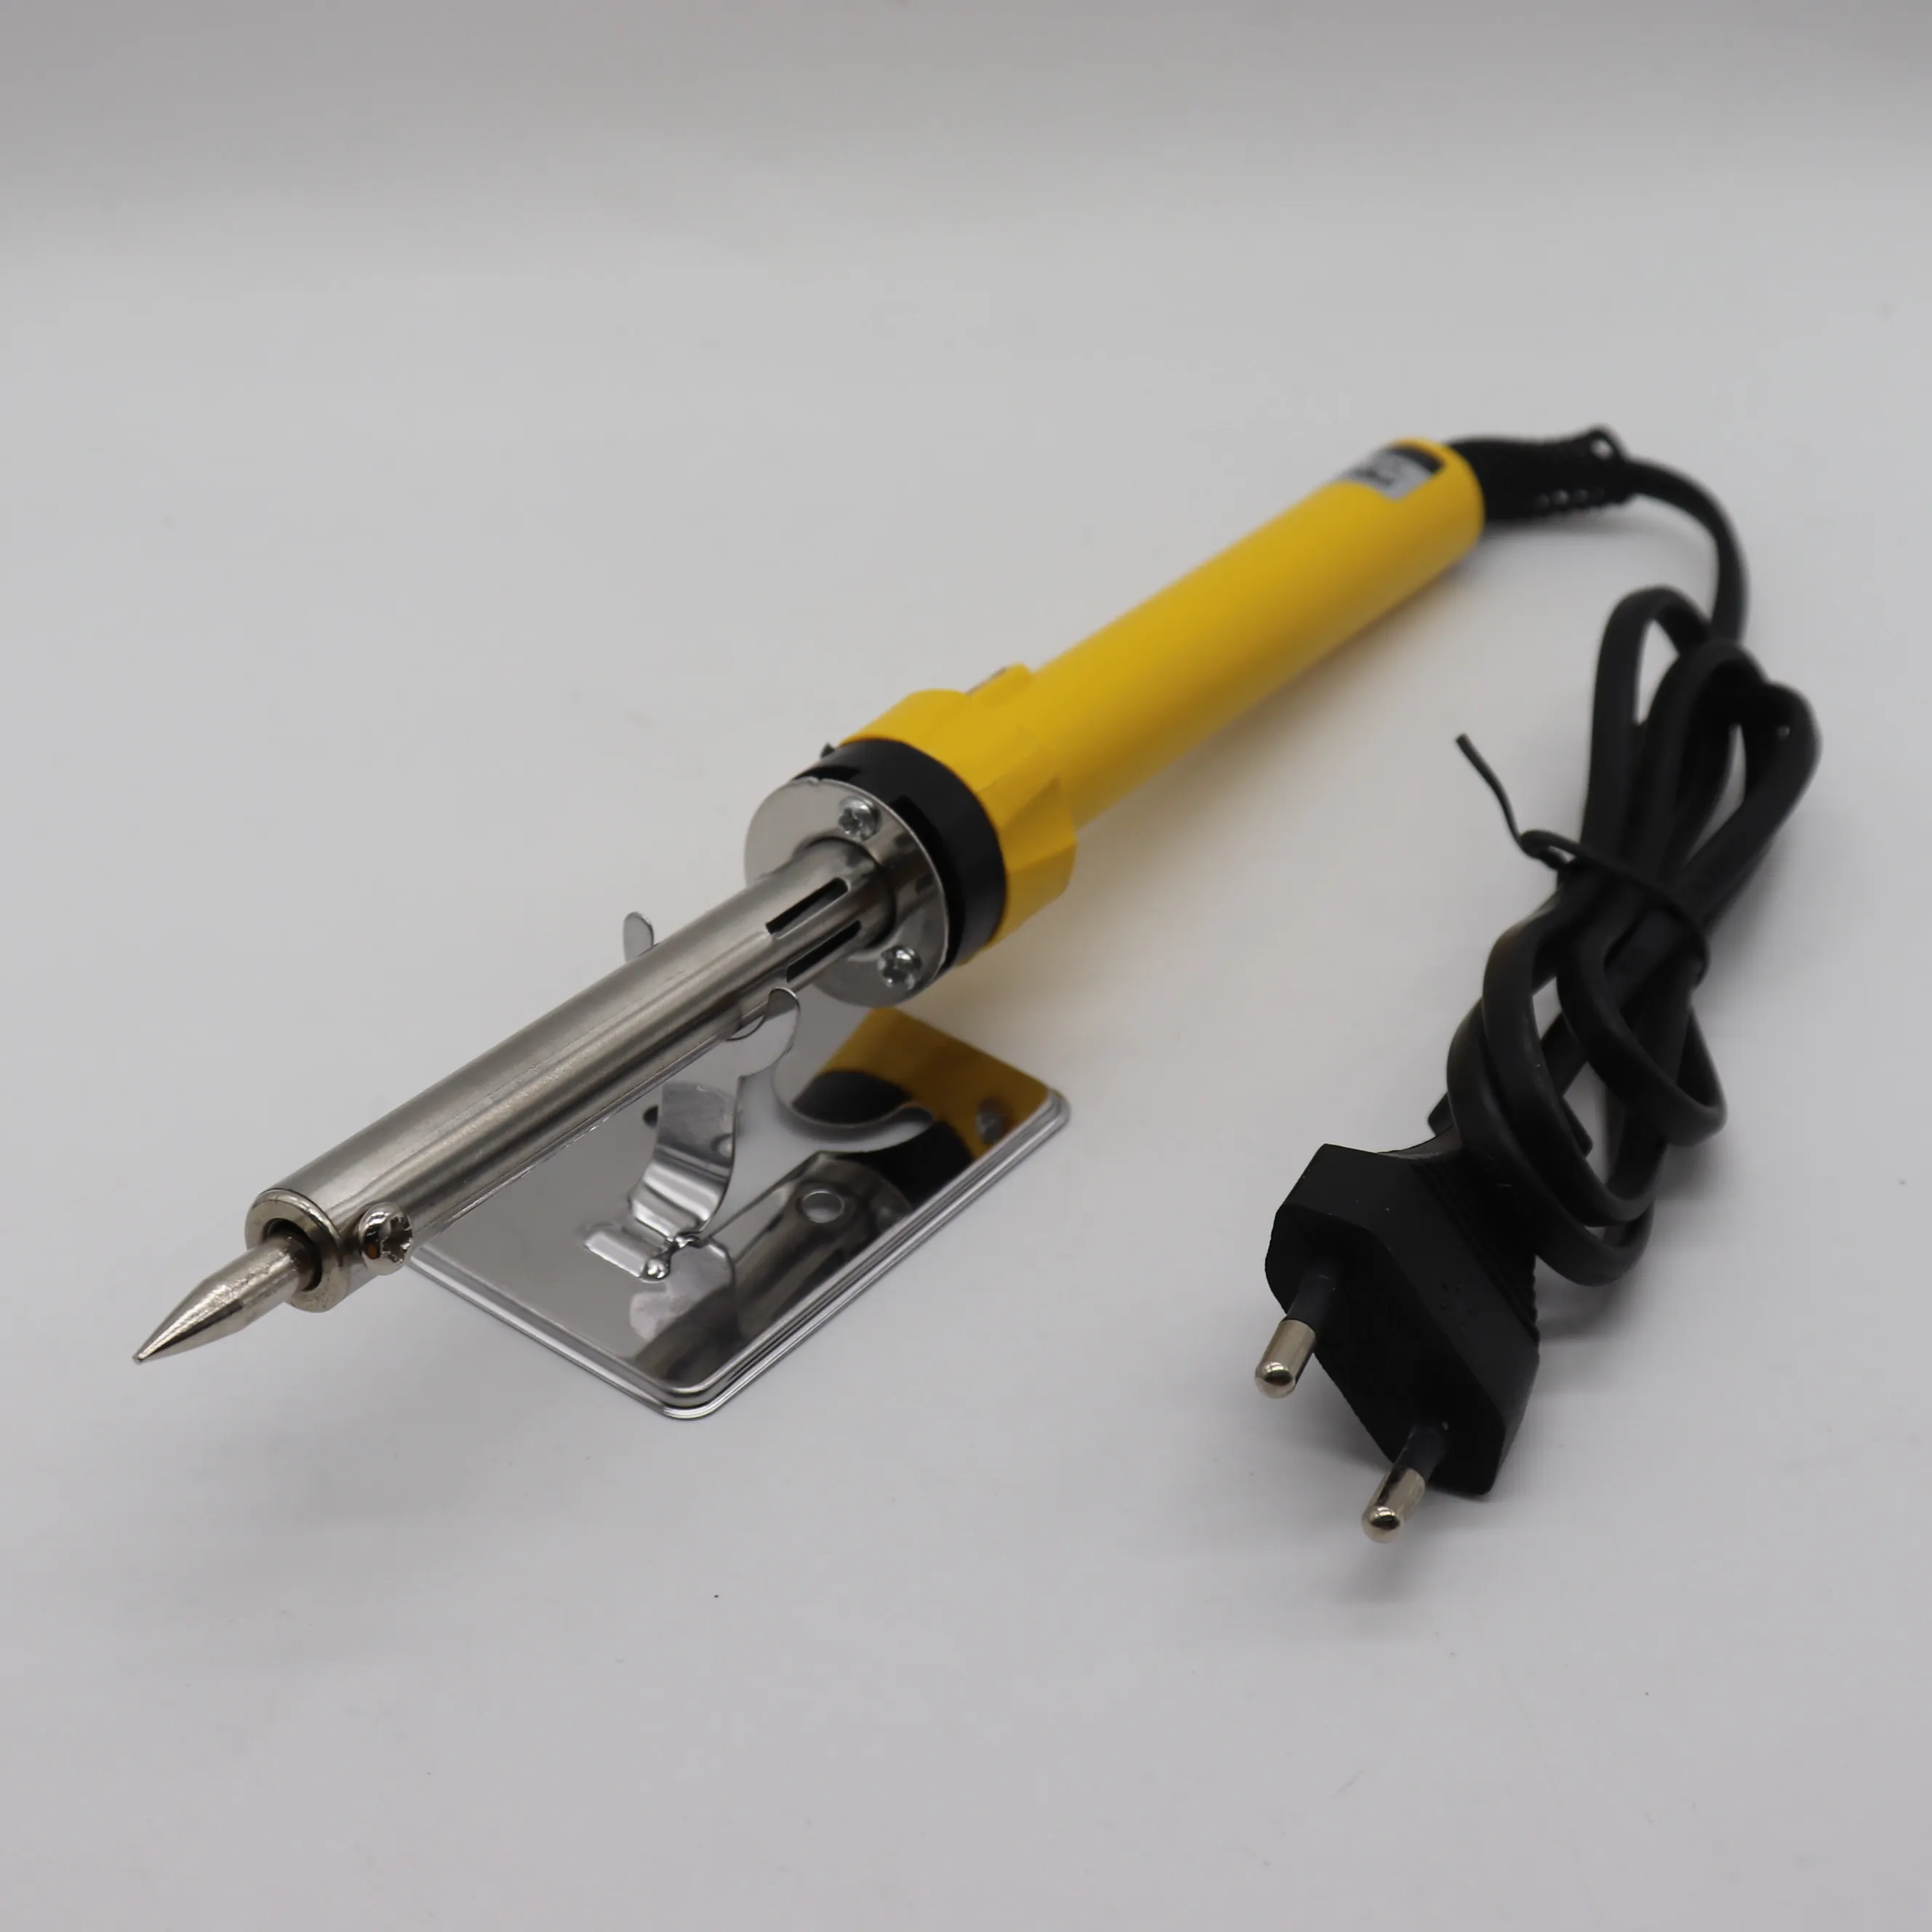 TY-S18 Soldering Iron 30w Rapid Warm-up Soldering Iron Recharge